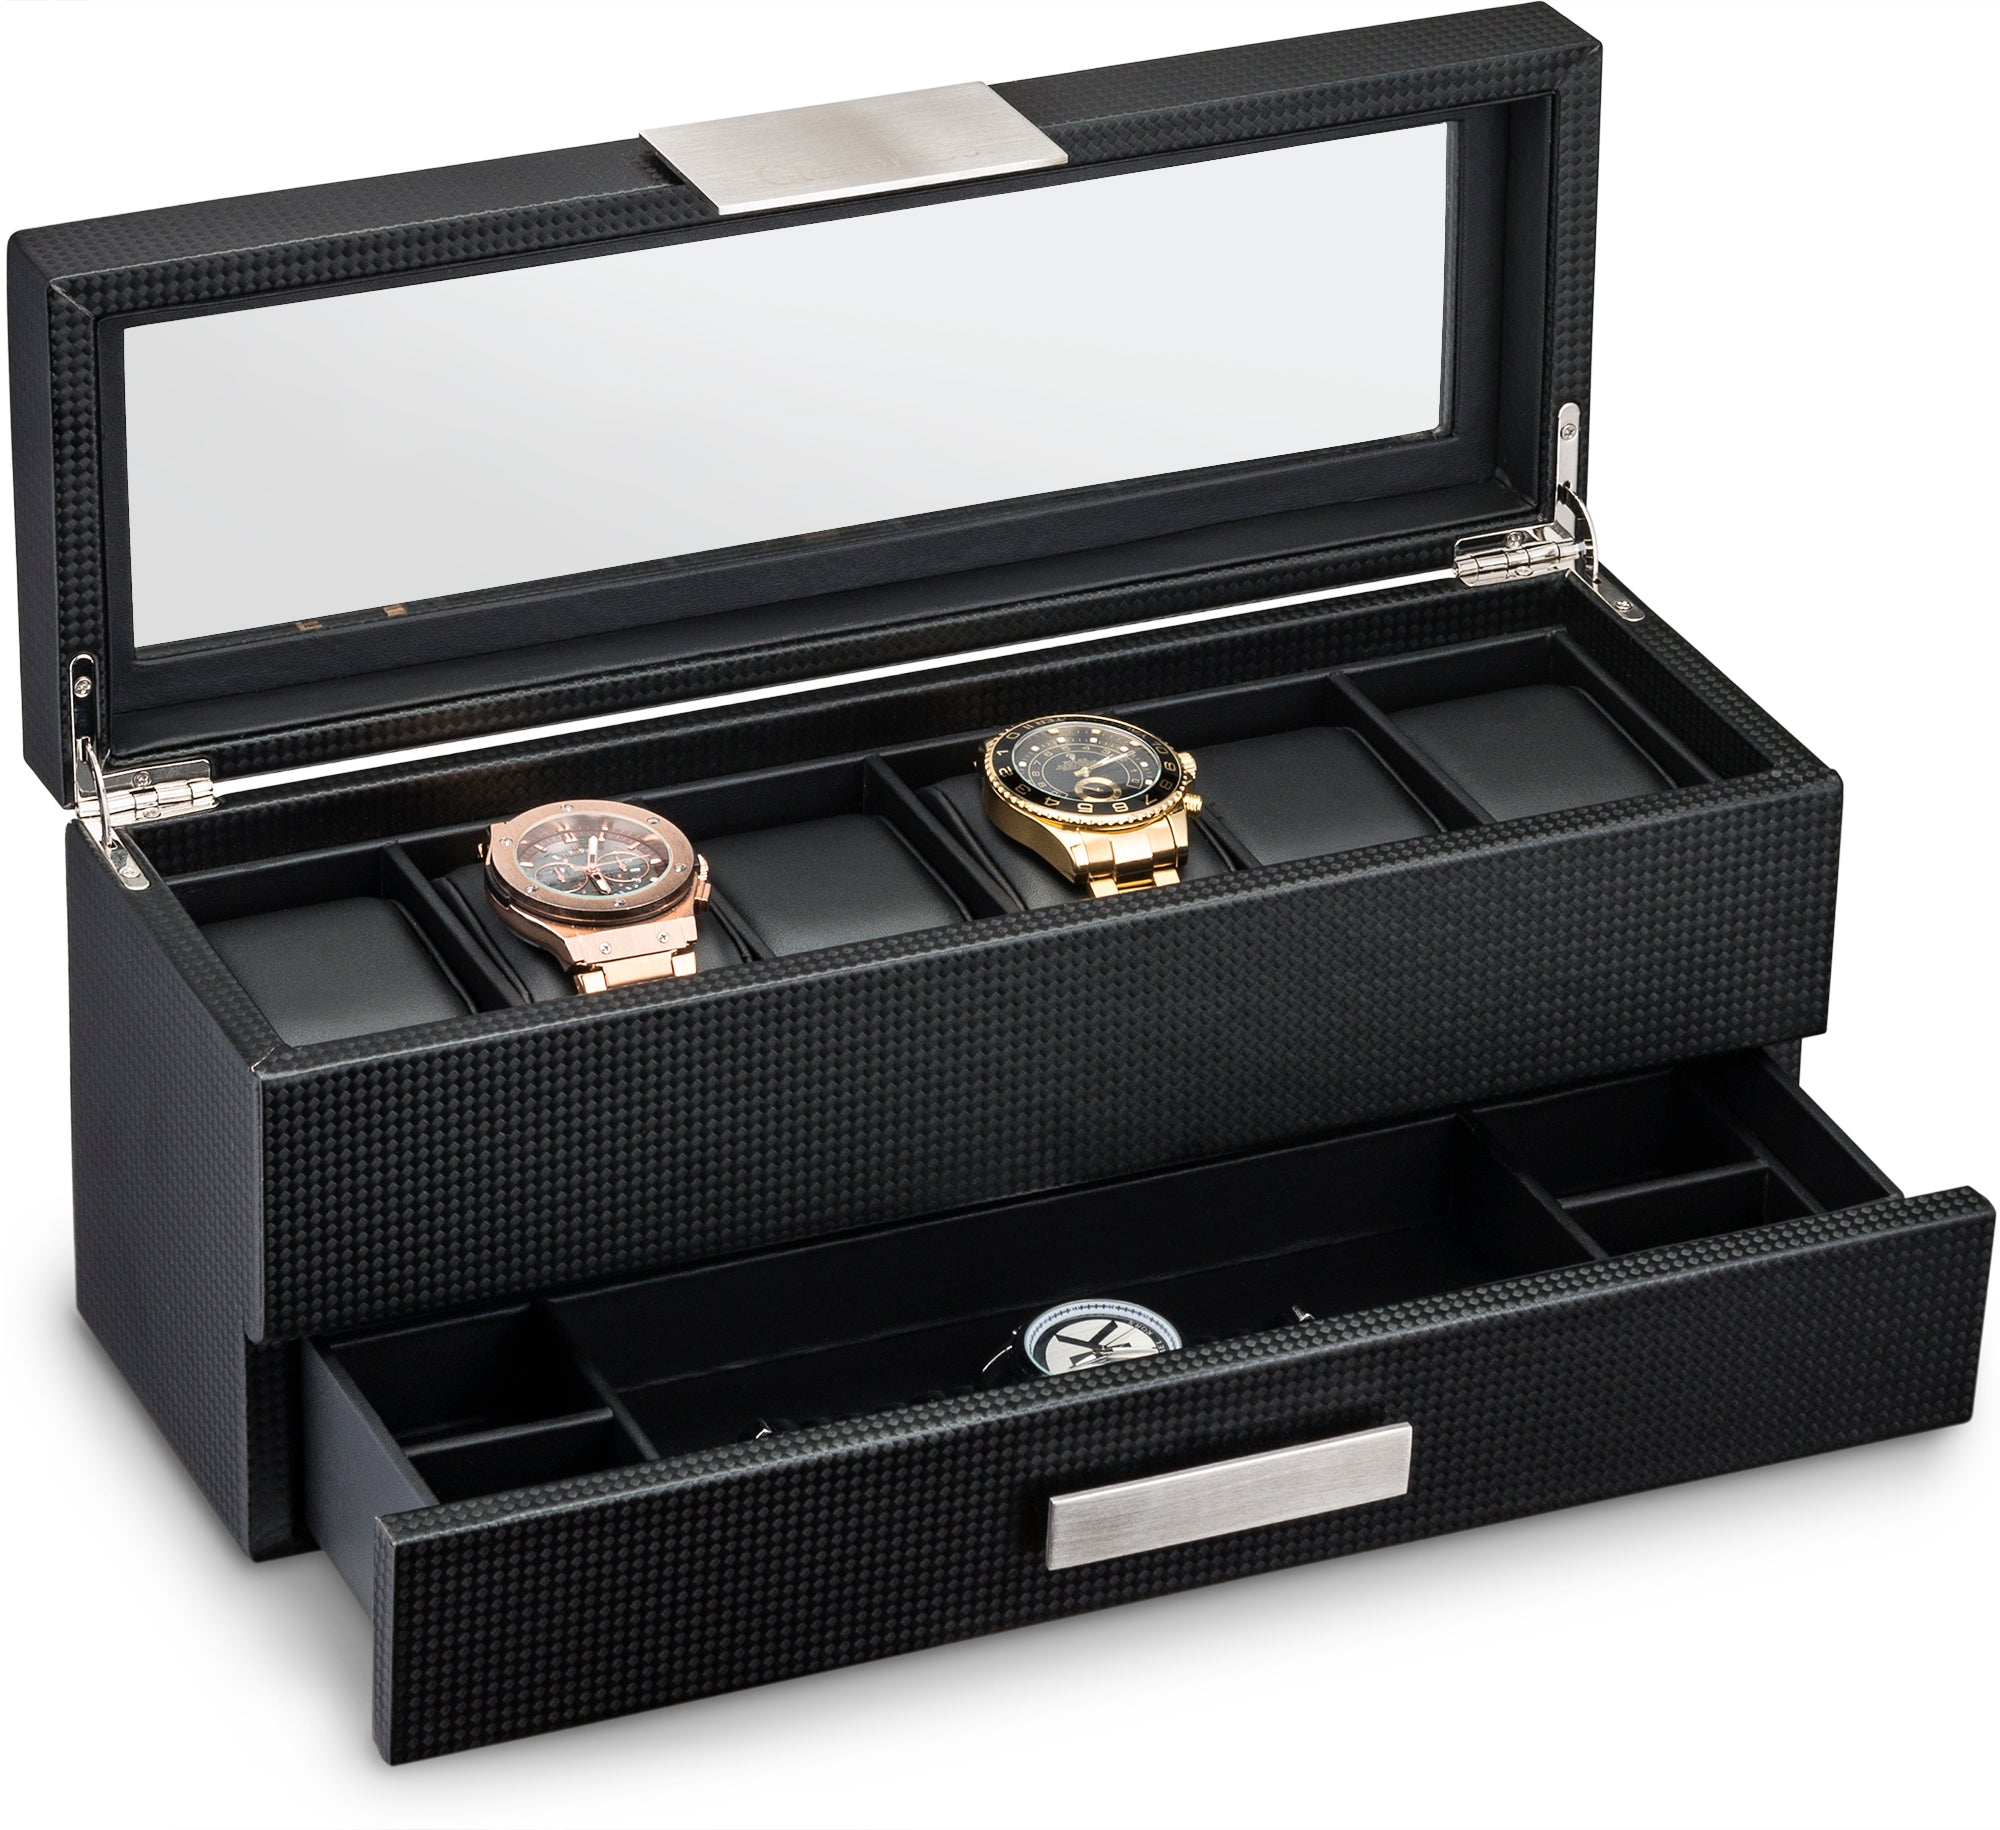 Watch Box Organizer for Men, Luxury Watch Display Case with Valet Drawer, 6  Slot Watch Holder with G…See more Watch Box Organizer for Men, Luxury